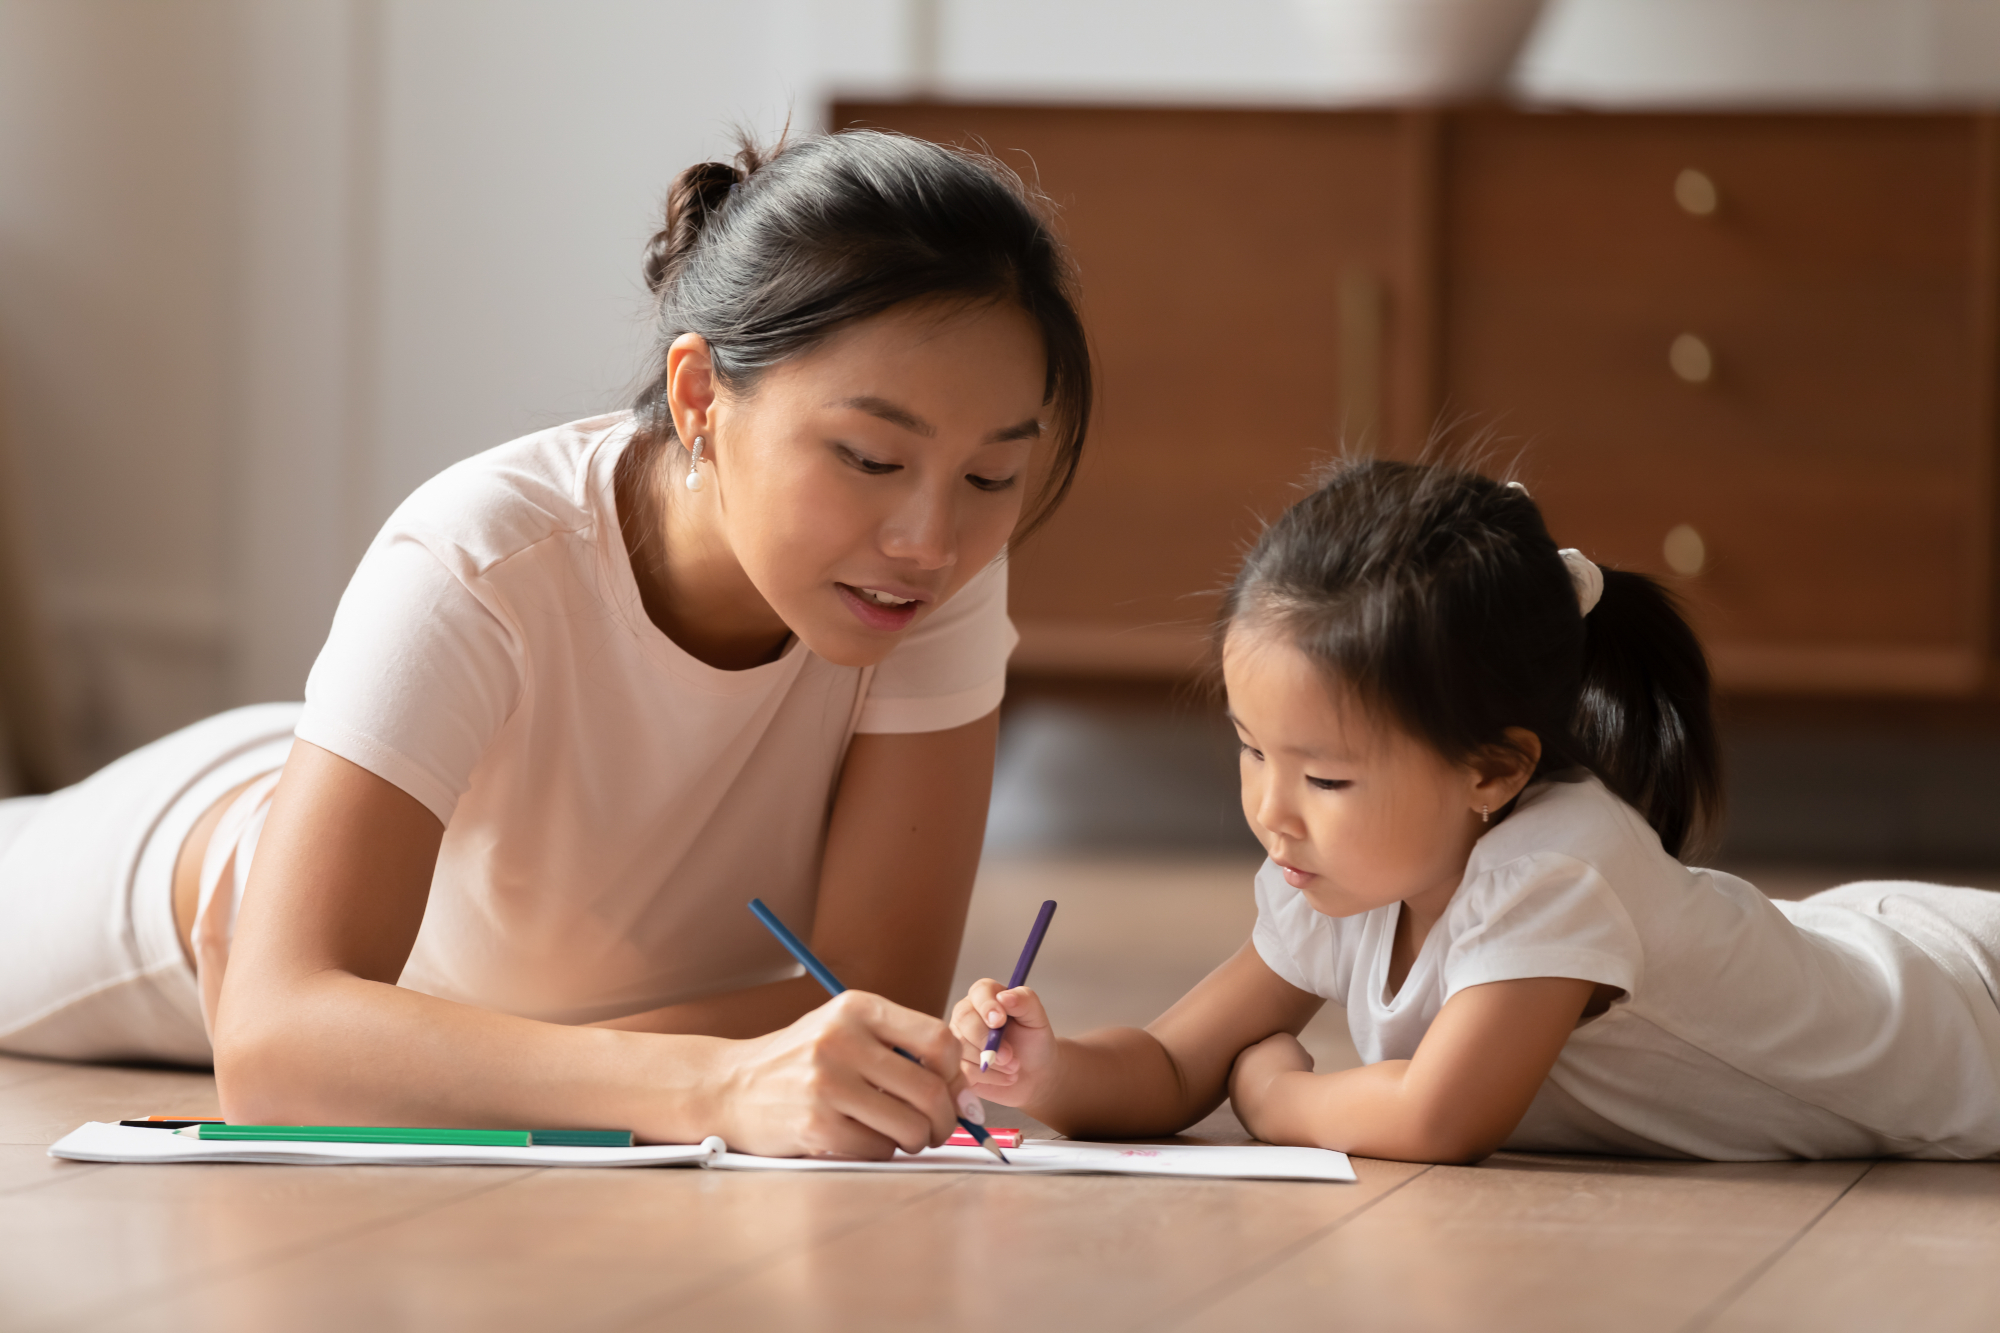 Young Vietnamese nanny drawing with a young girl she watches.